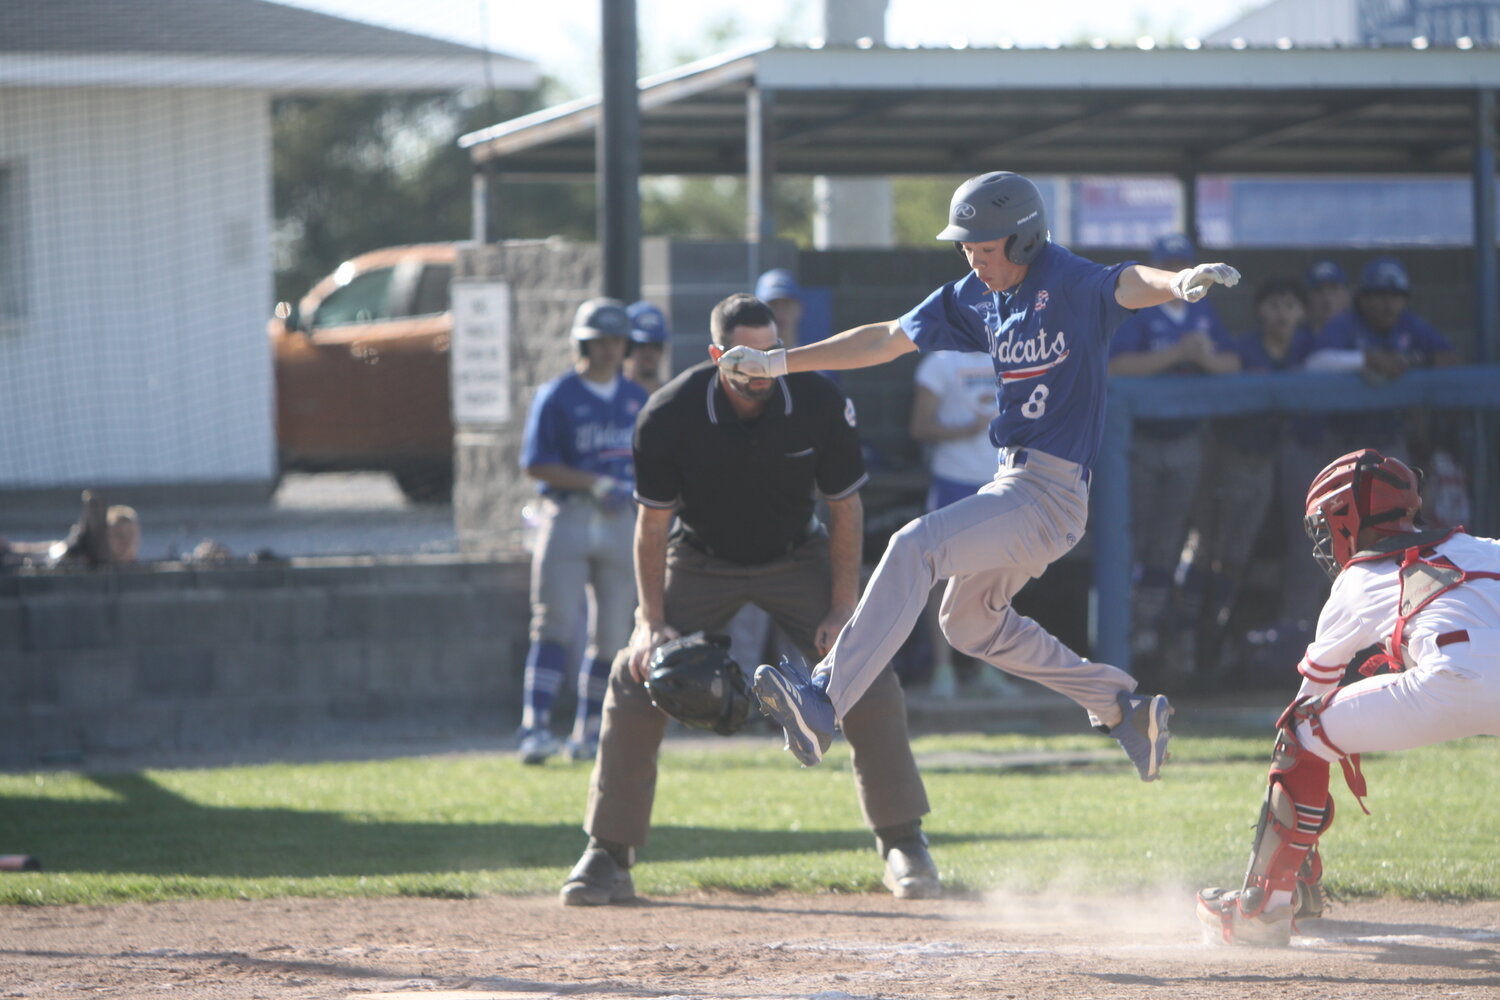 Montgomery County sophomore Jacob Hogue attempts to score in the bottom of the second against Elsberry on May 5 in an Eastern Missouri Conference game. Hogue and the Wildcats won 11-8.